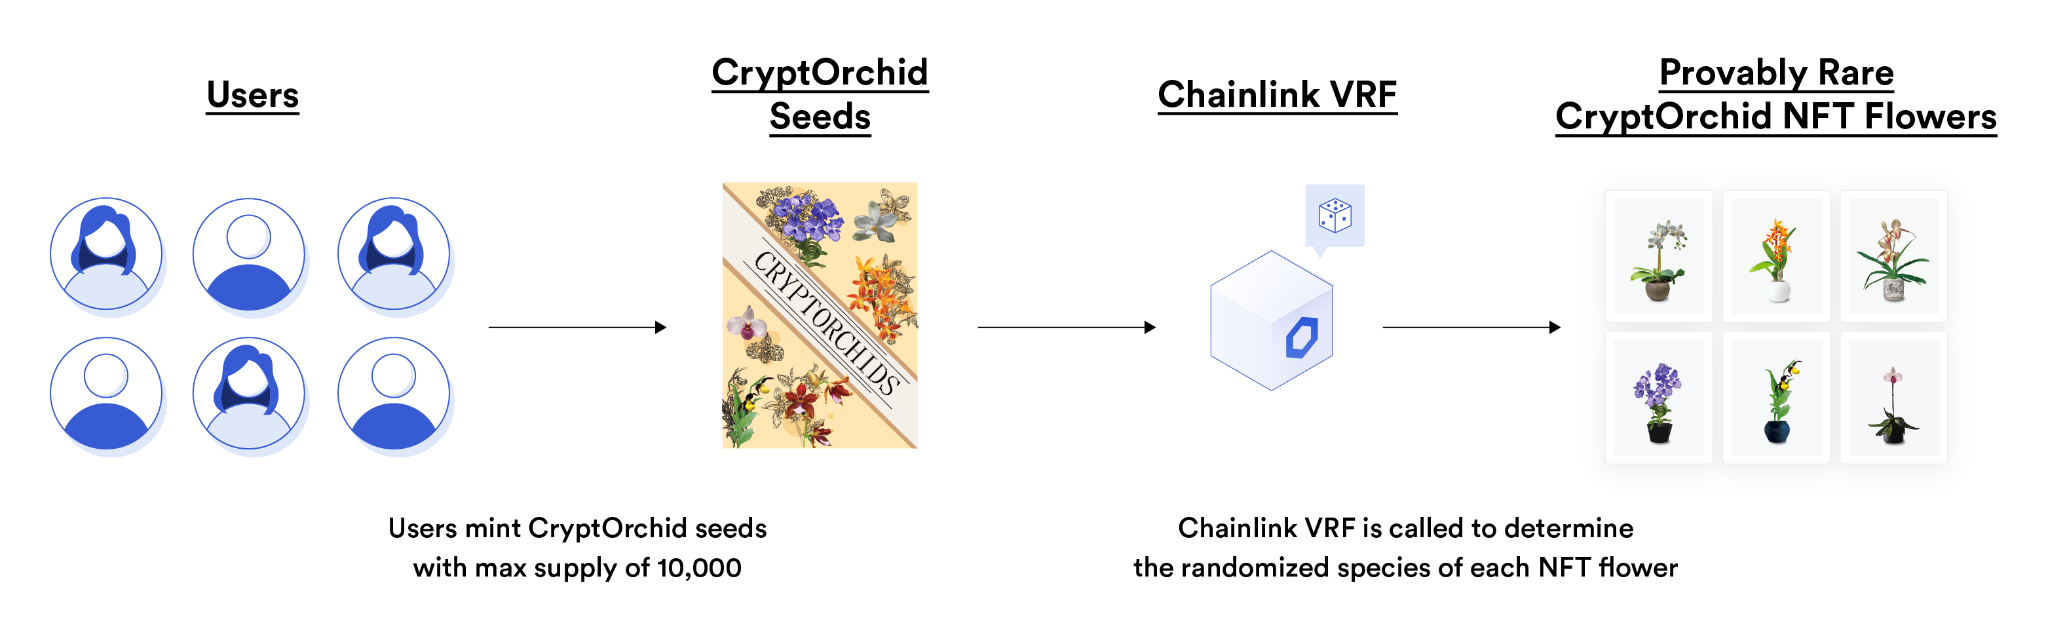 A diagram showing how CryptOrchid uses Chainlink VRF to mint provably rare NFTs.